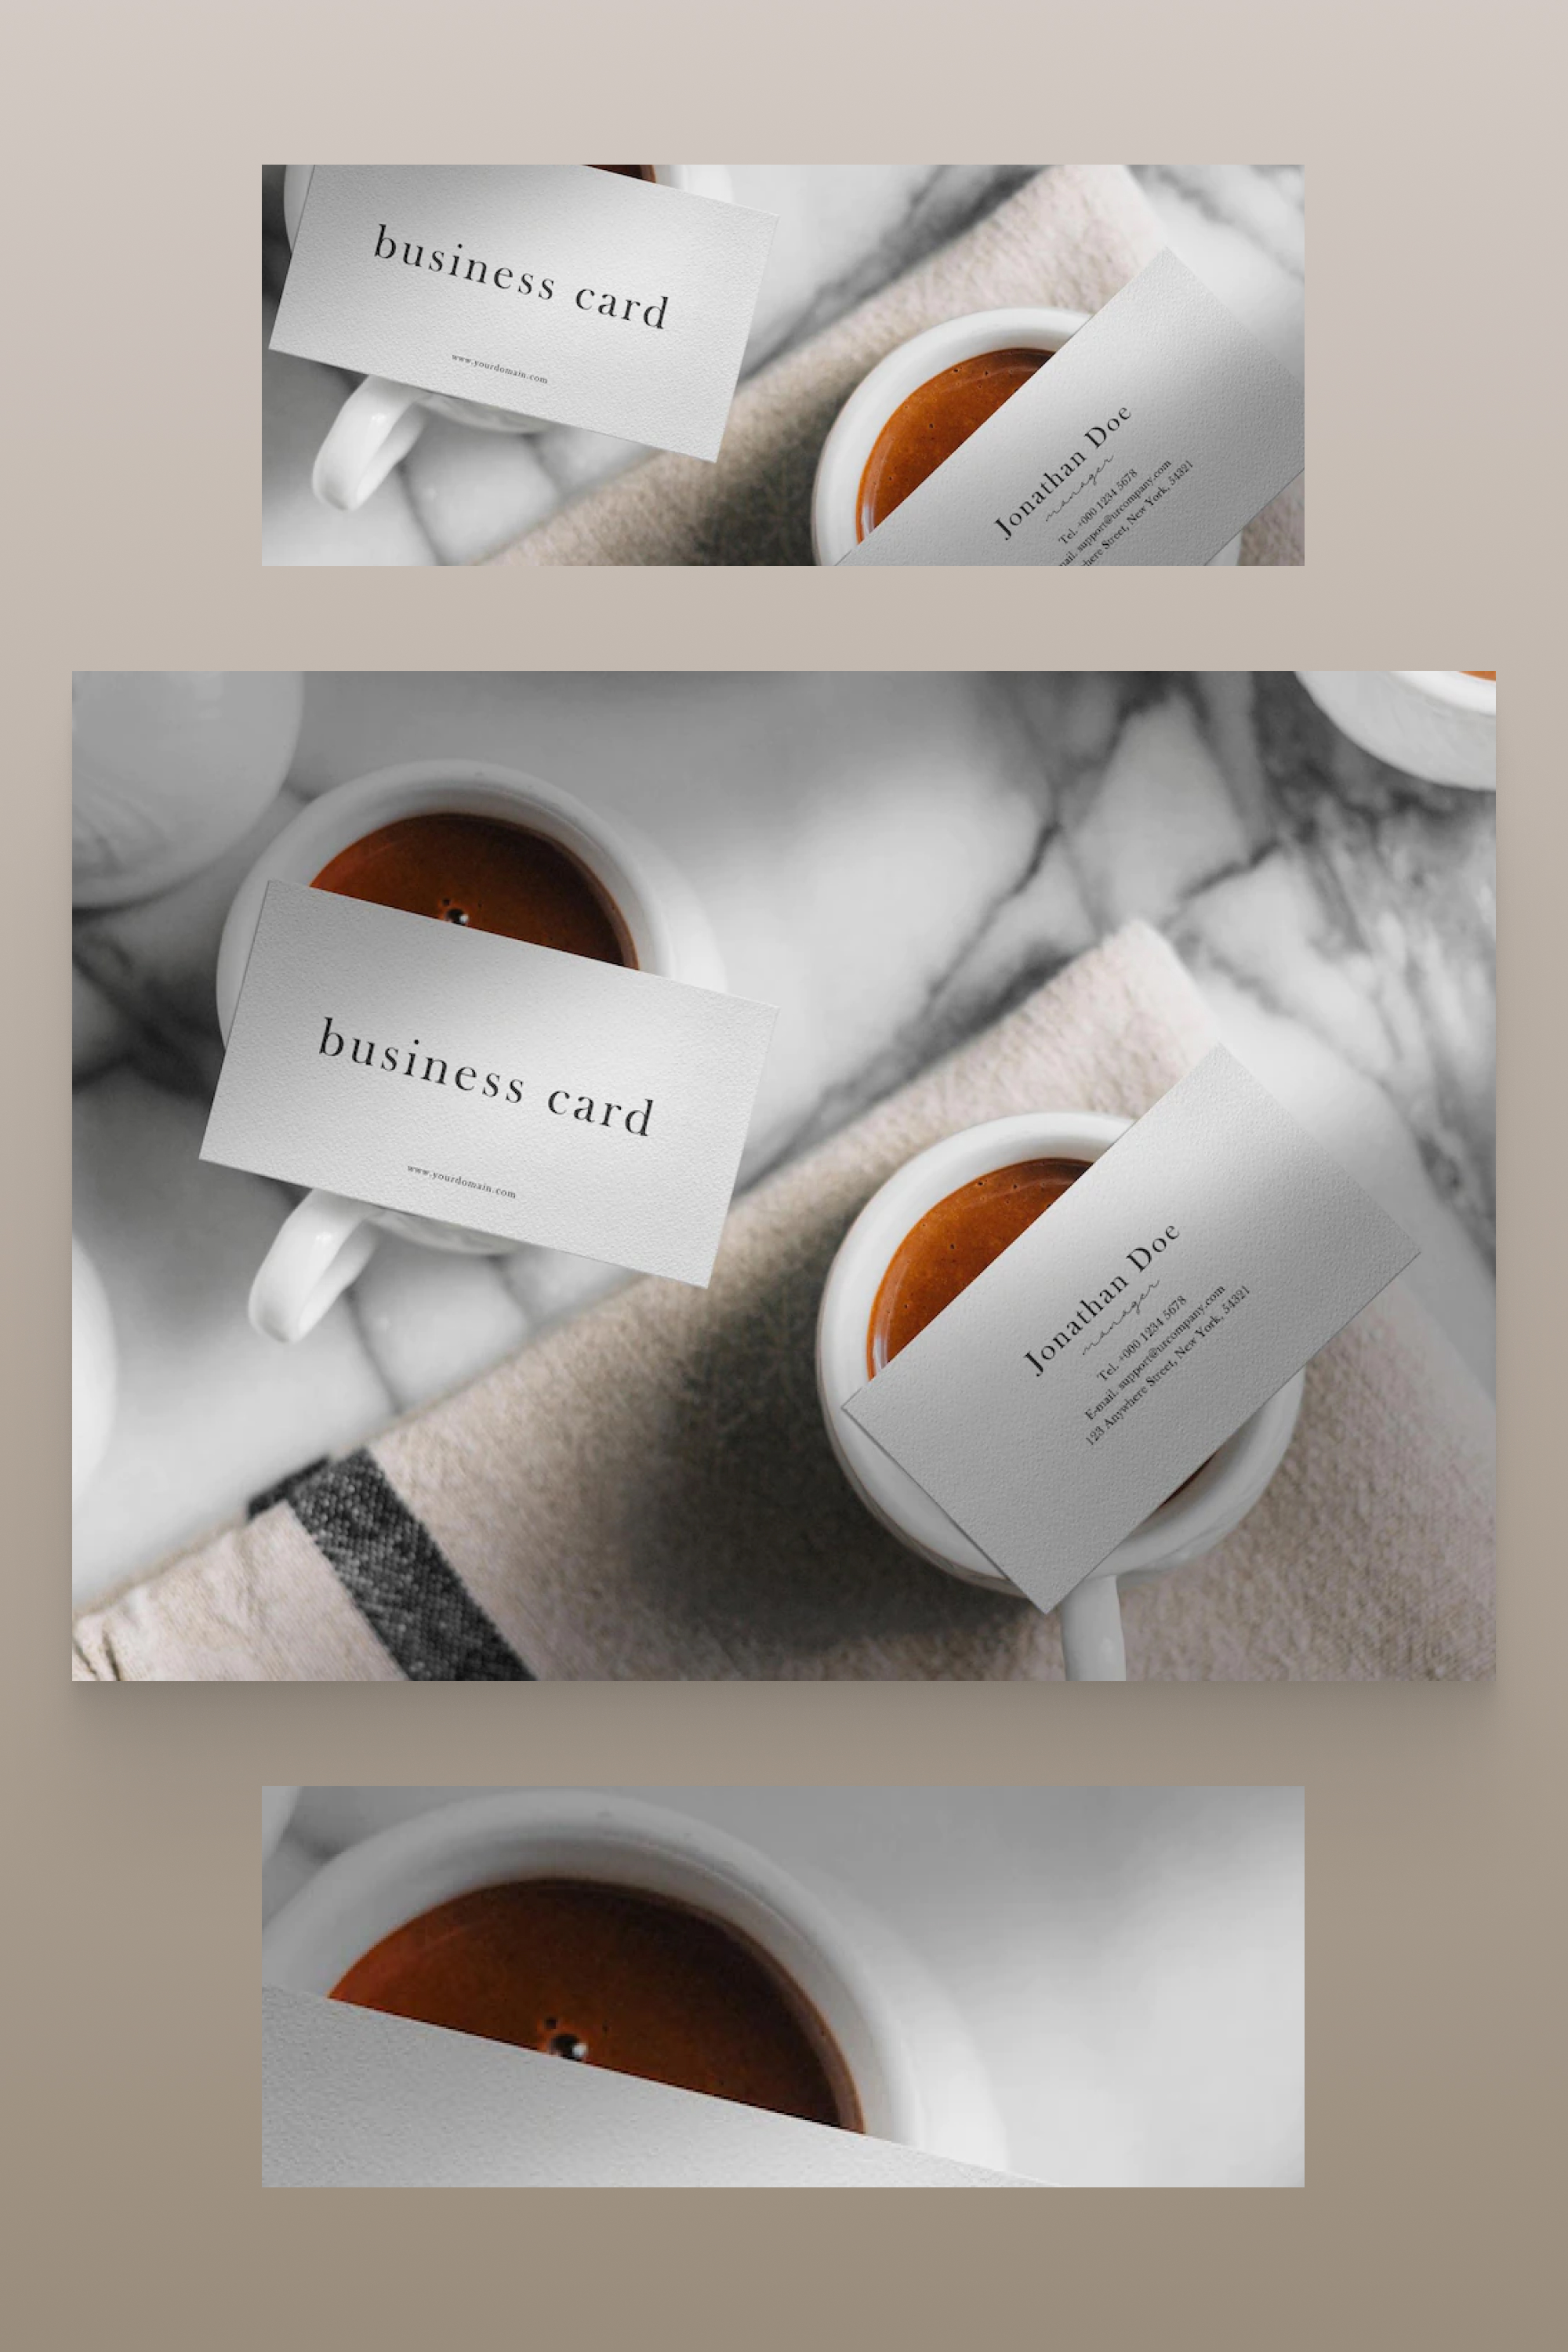 White business cards with black text on a coffee cup on a towel.